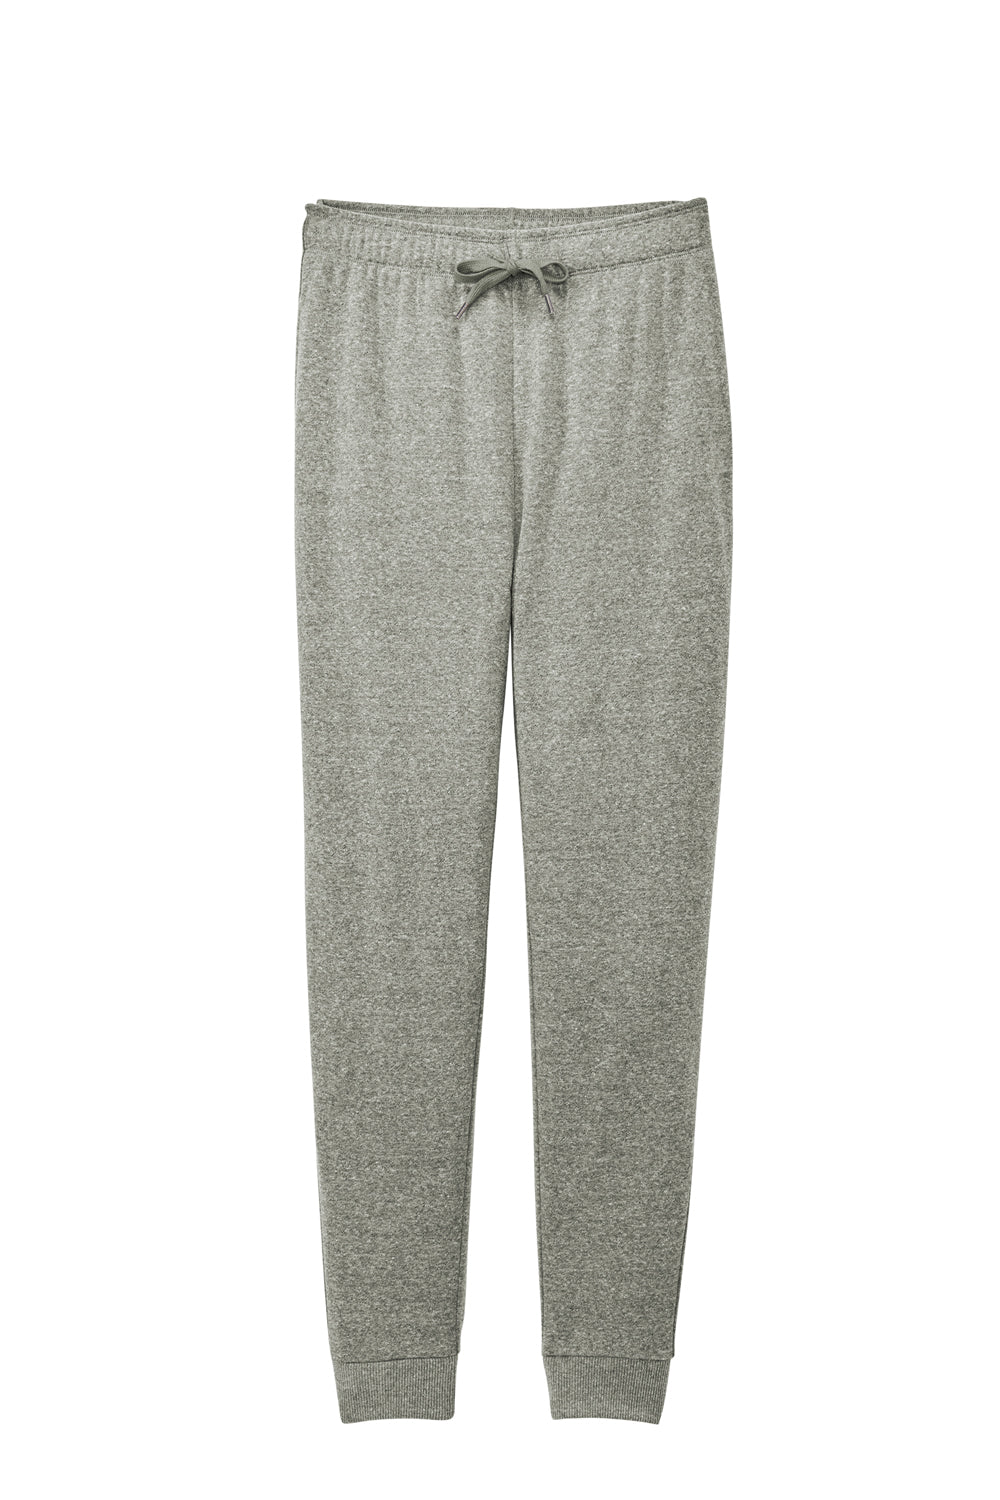 District DT1310 Womens Perfect Tri Fleece Jogger Sweatpants w/ Pockets Grey Frost Flat Front